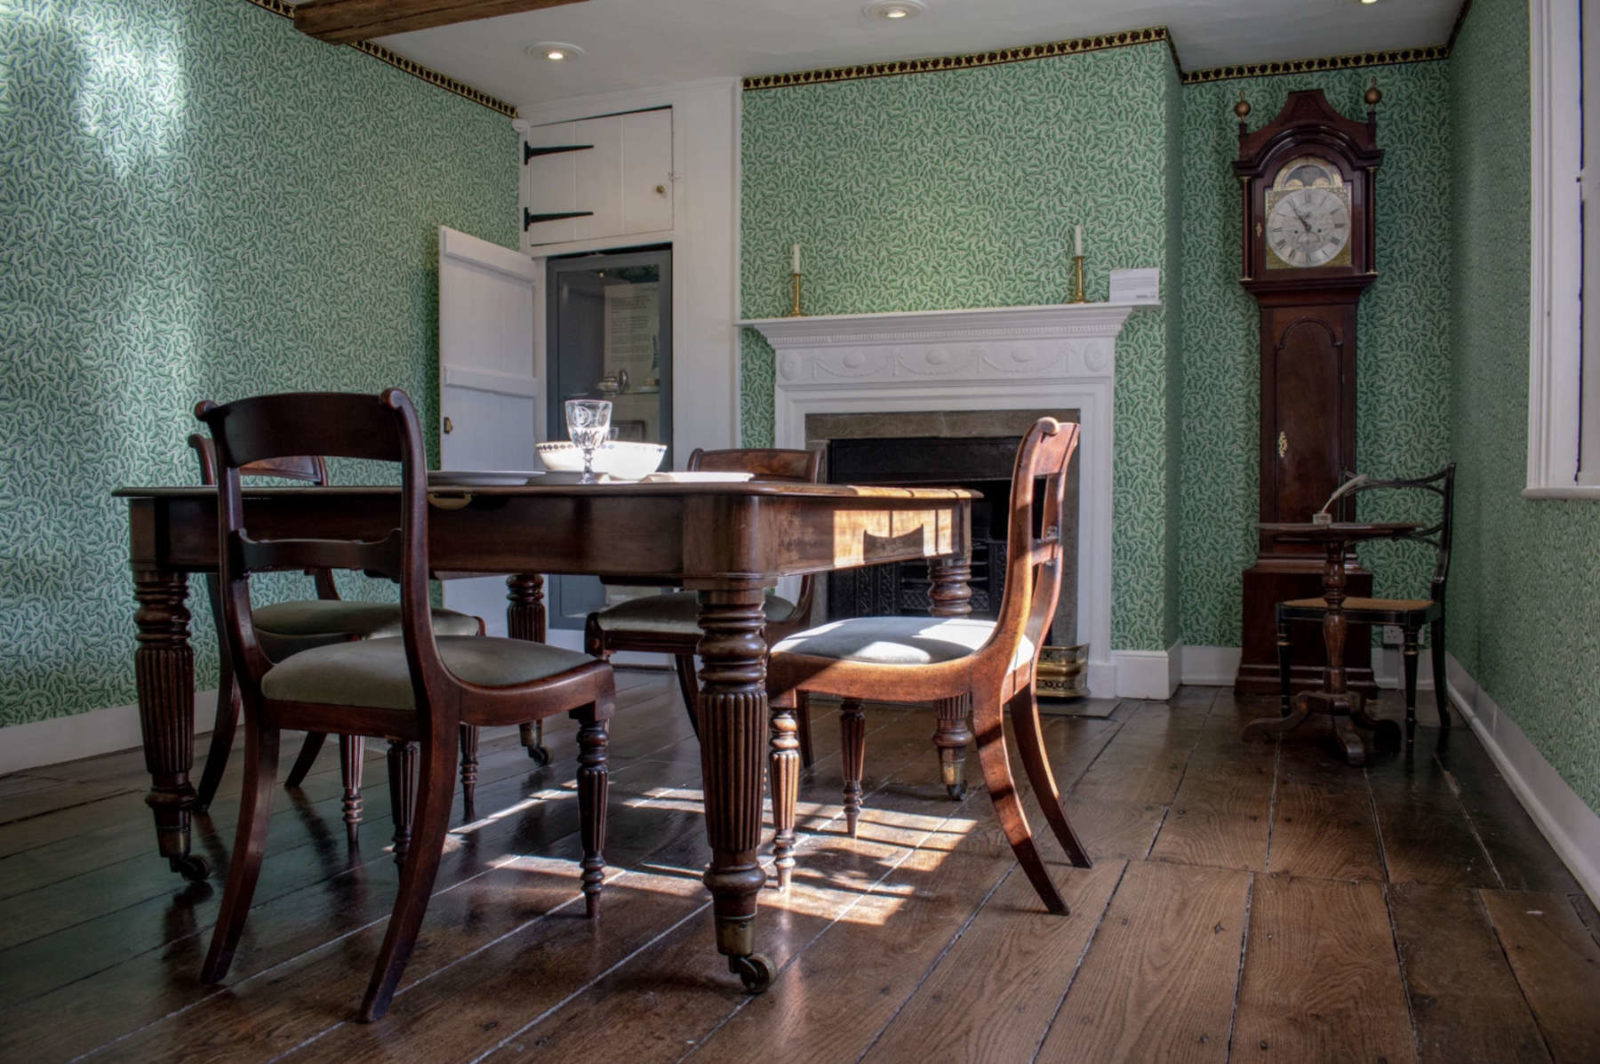 The Dining Parlour at Jane Austen's House